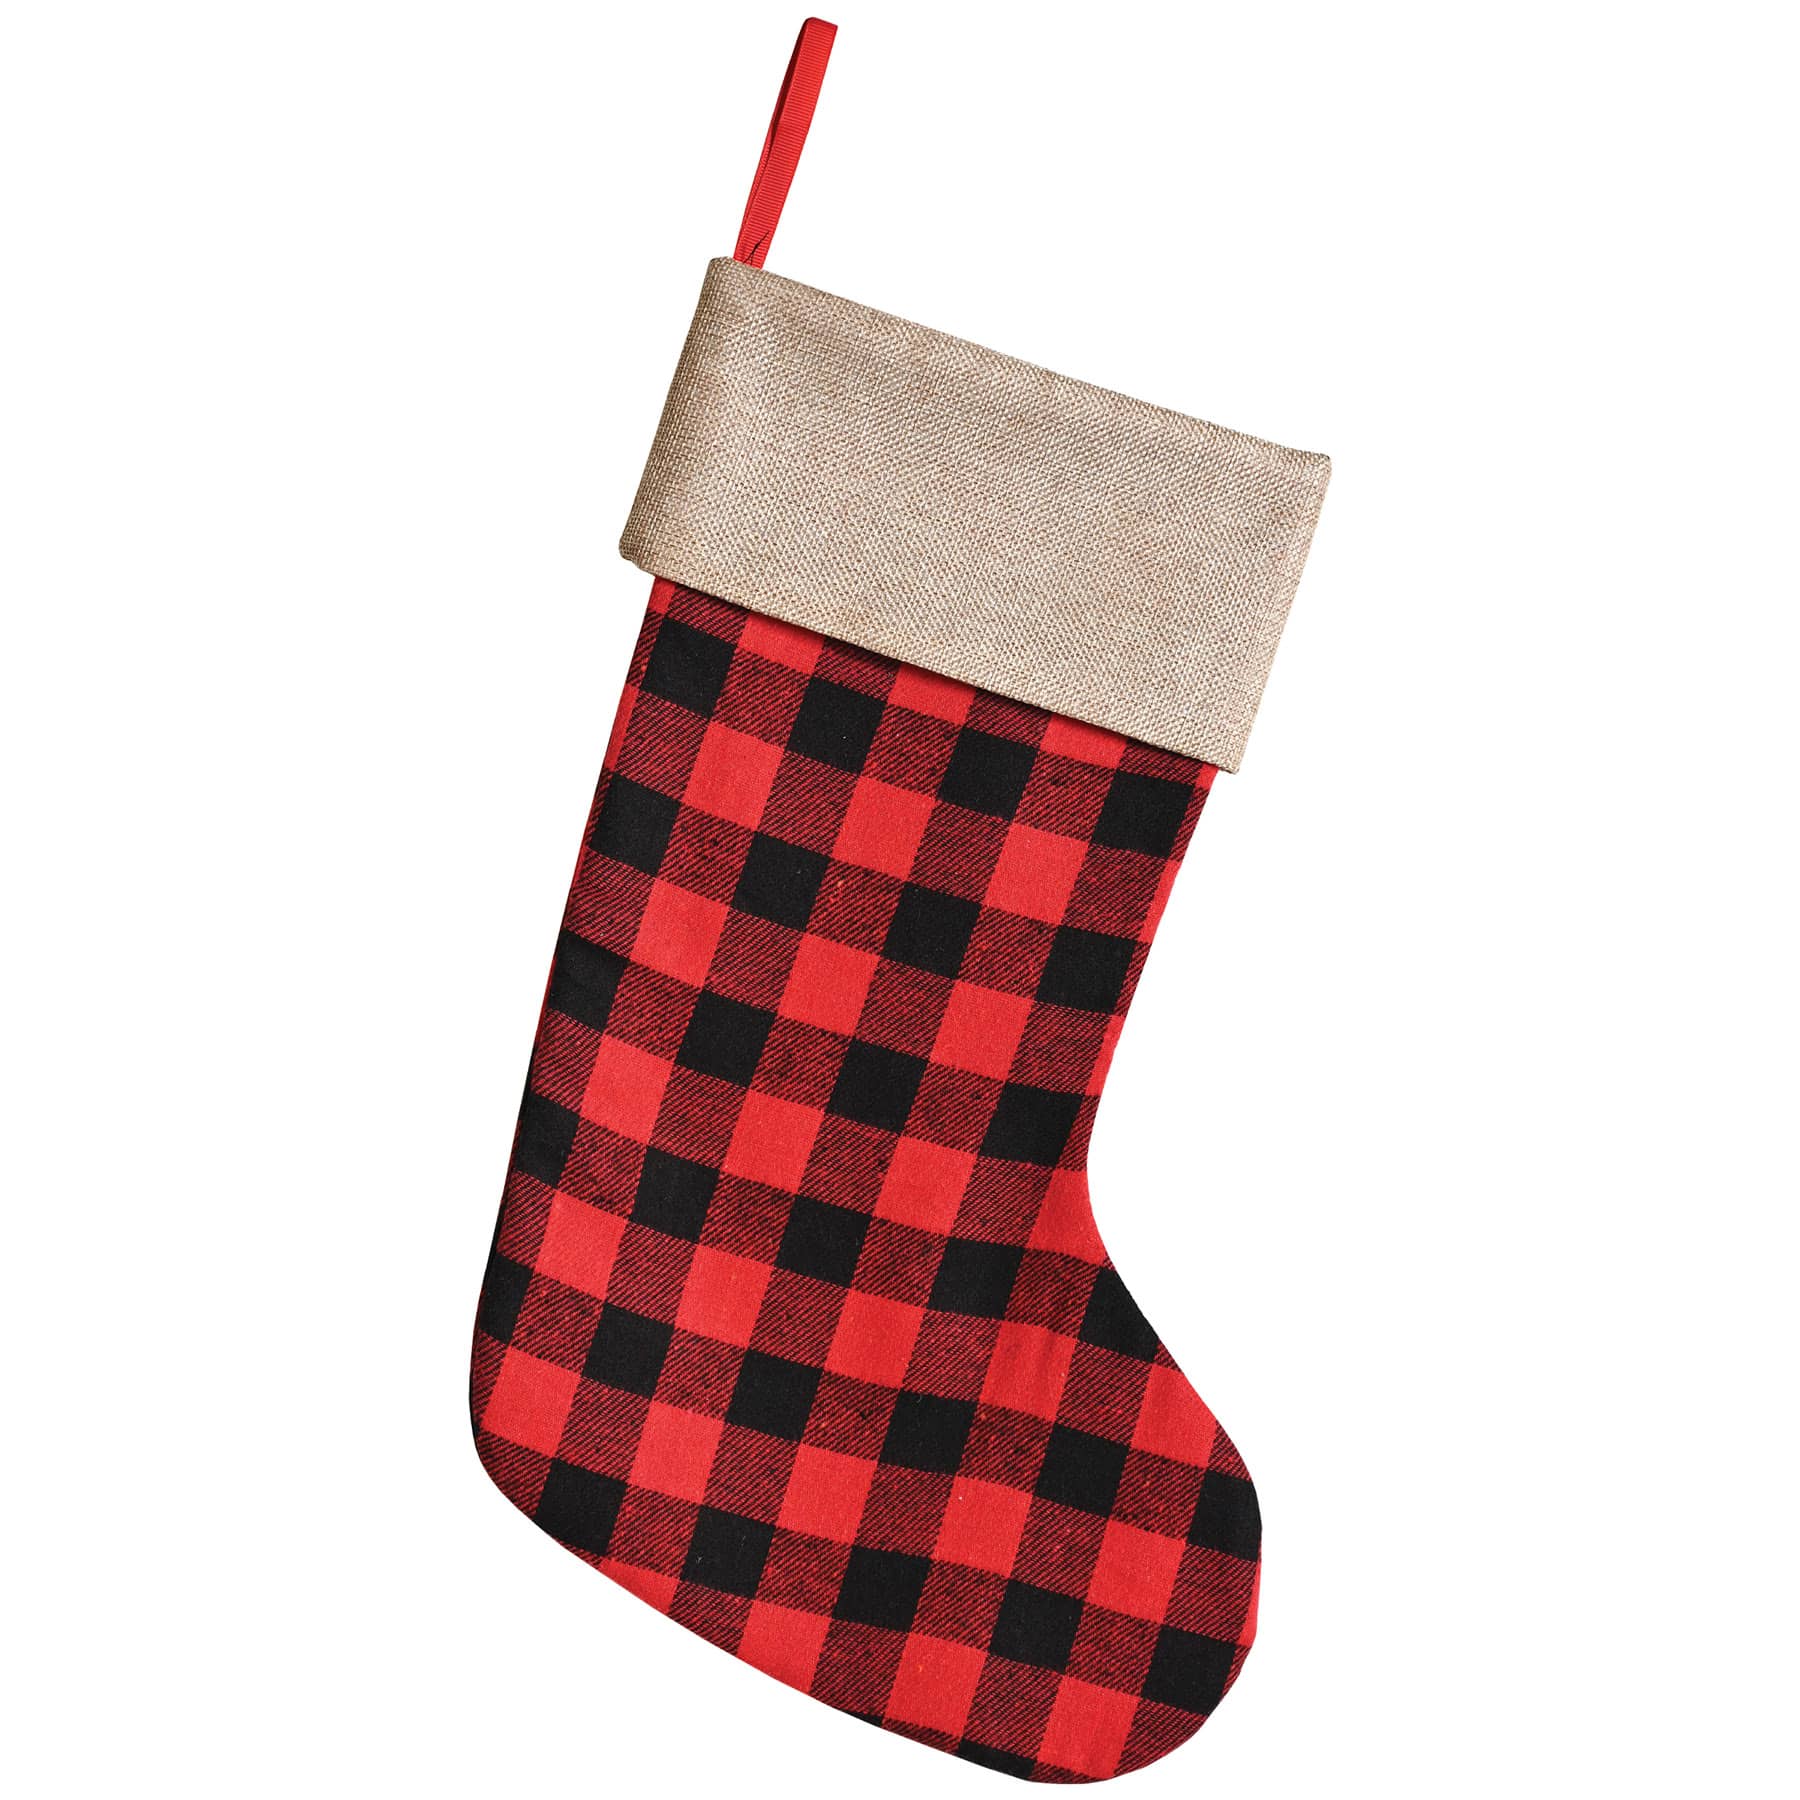 Red and Black Plaid hanging fabric Christmas stocking